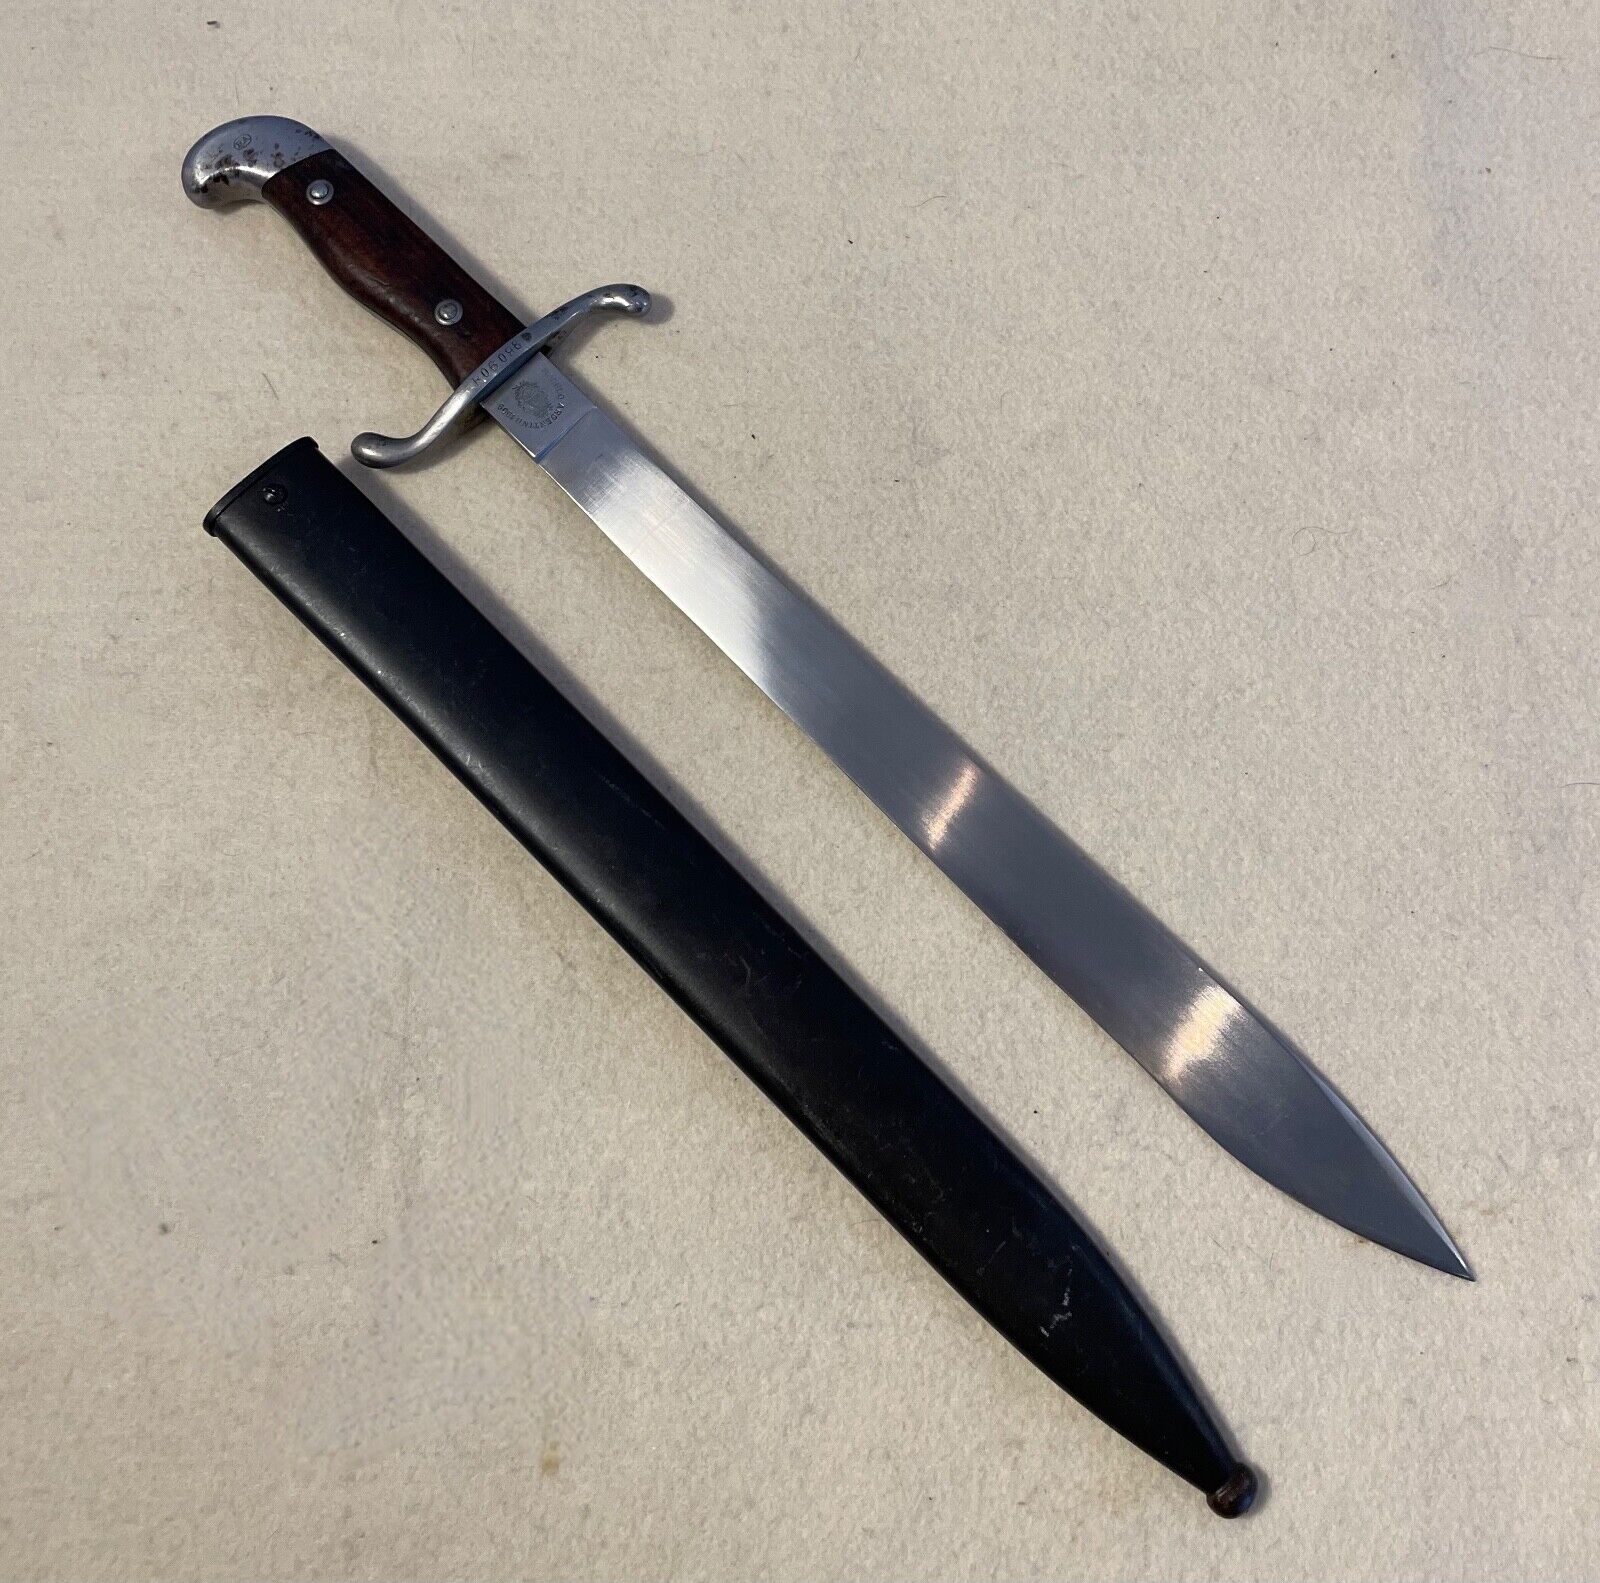 BEAUTIFUL UNISSUED ARGENTINE BOLO KNIFE SWORD & SCABBARD MATCHING